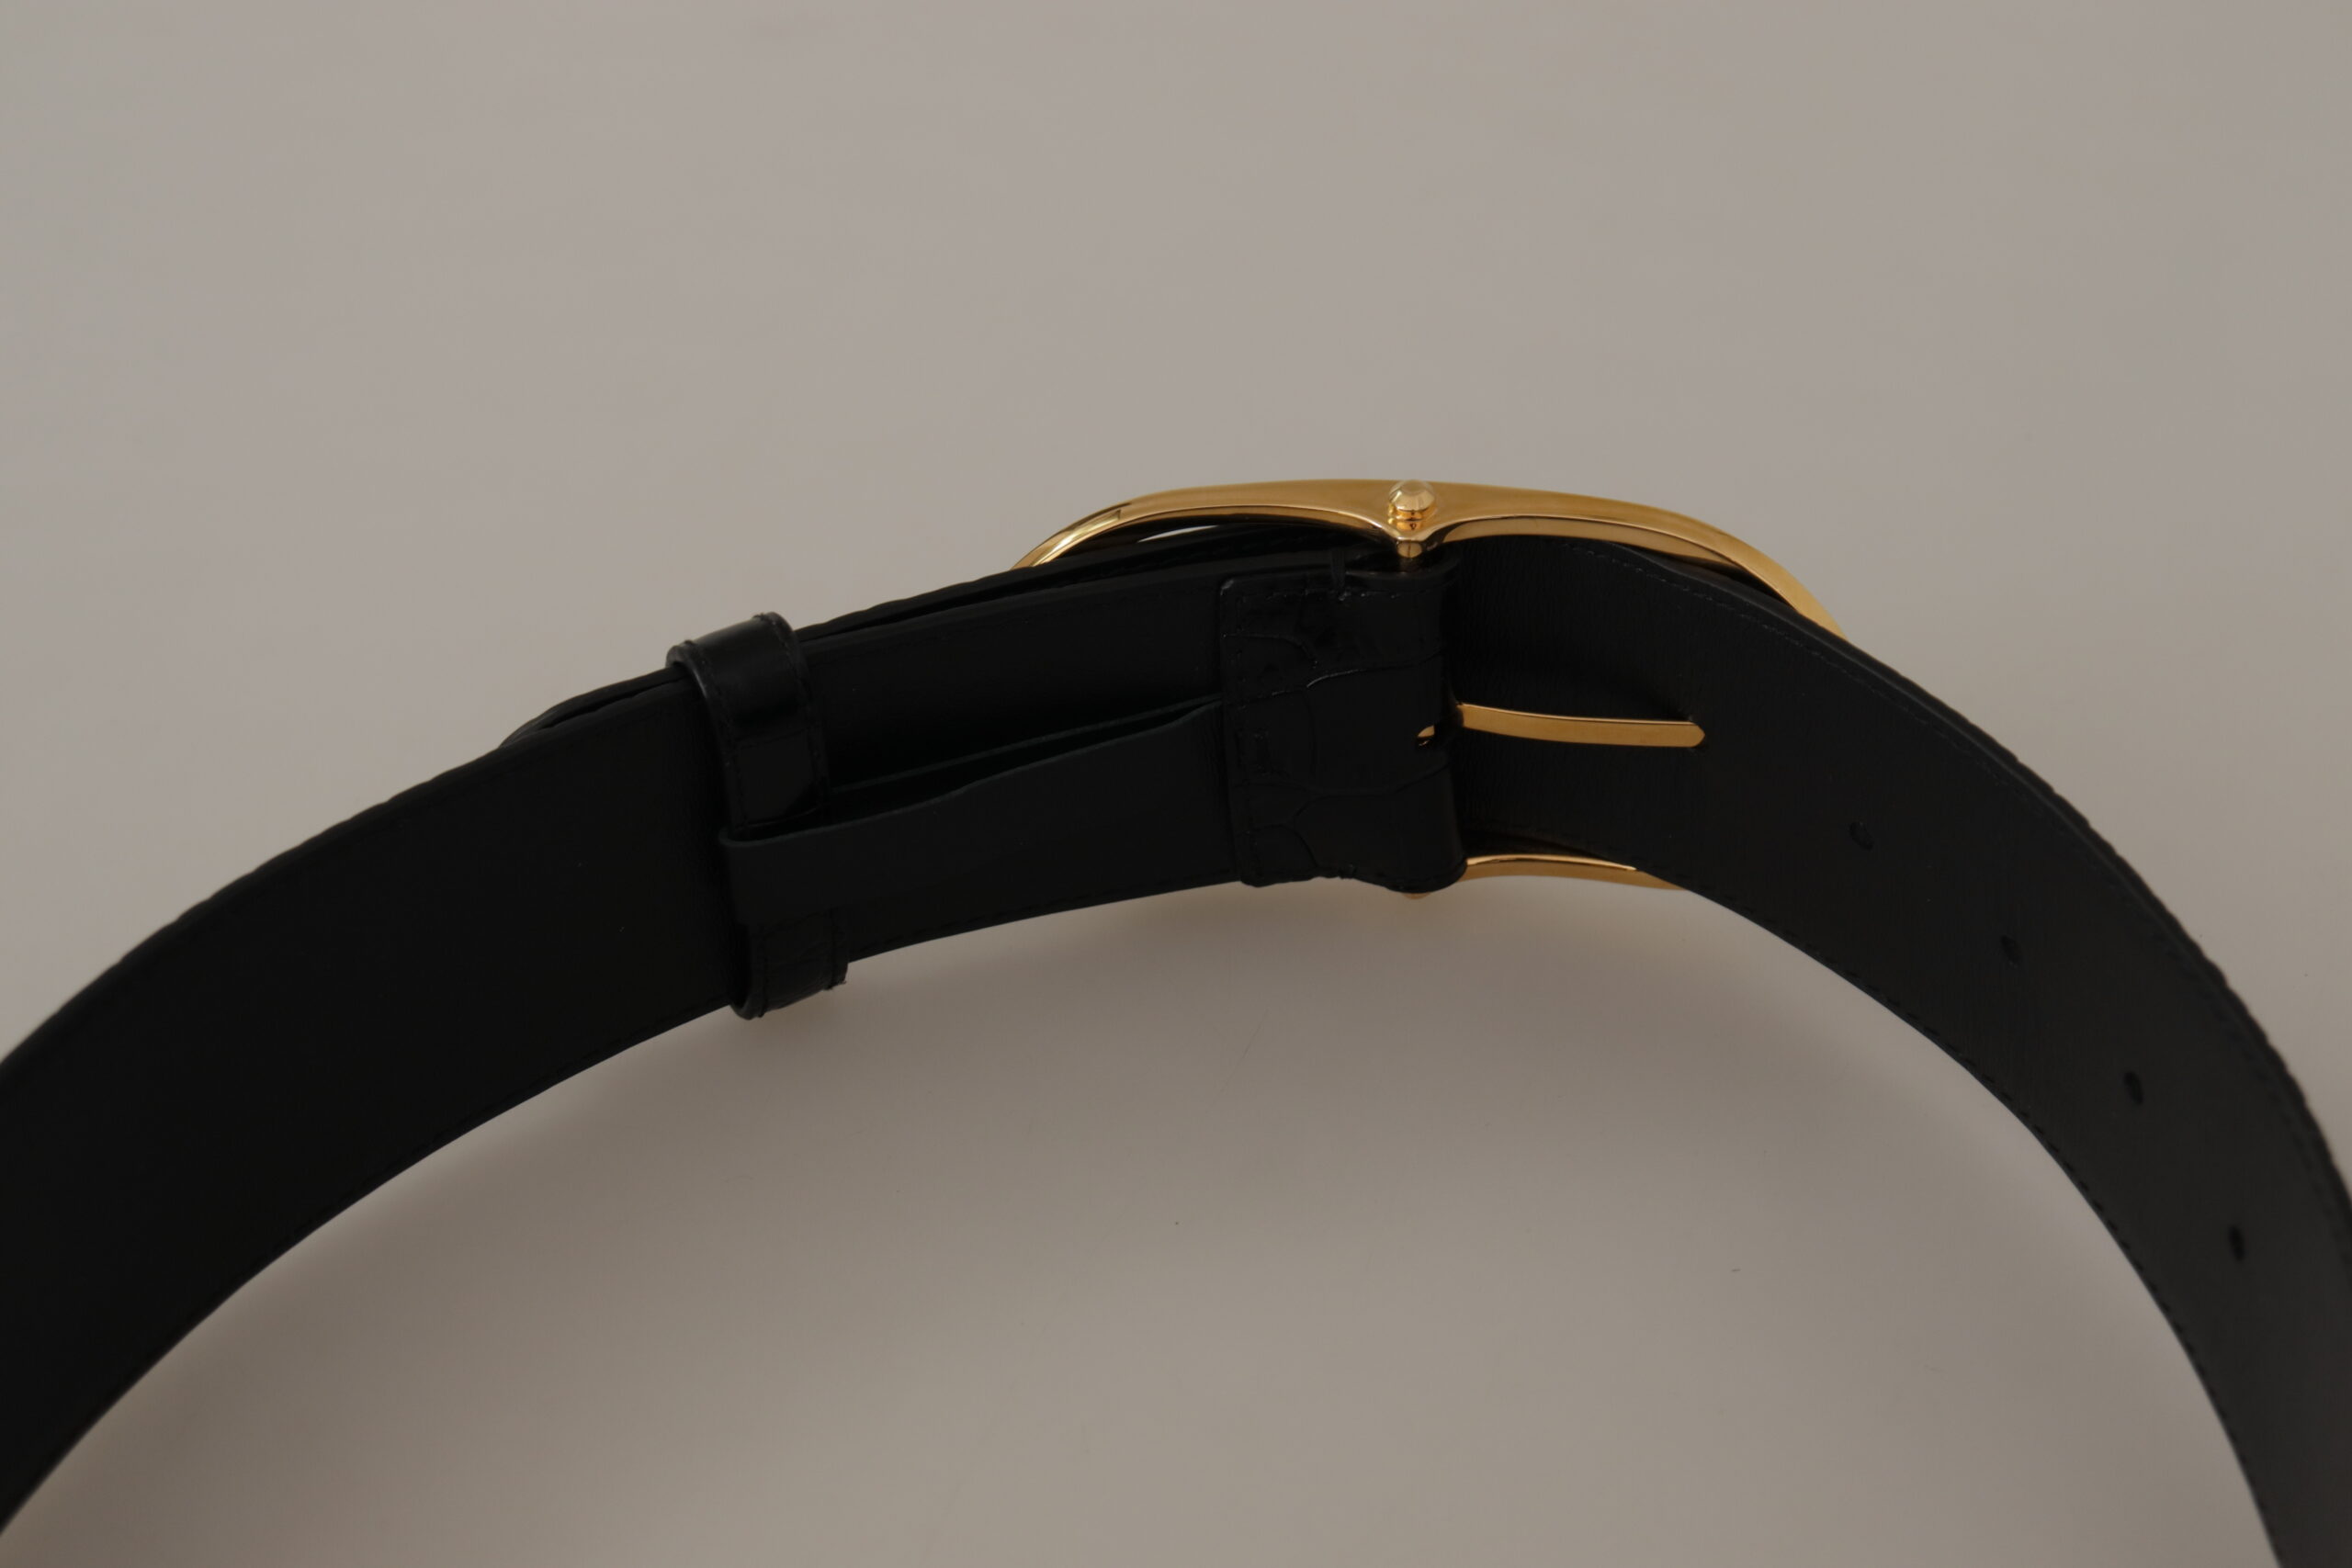 Embossed Leather Gold Tone Metal Buckle Belt